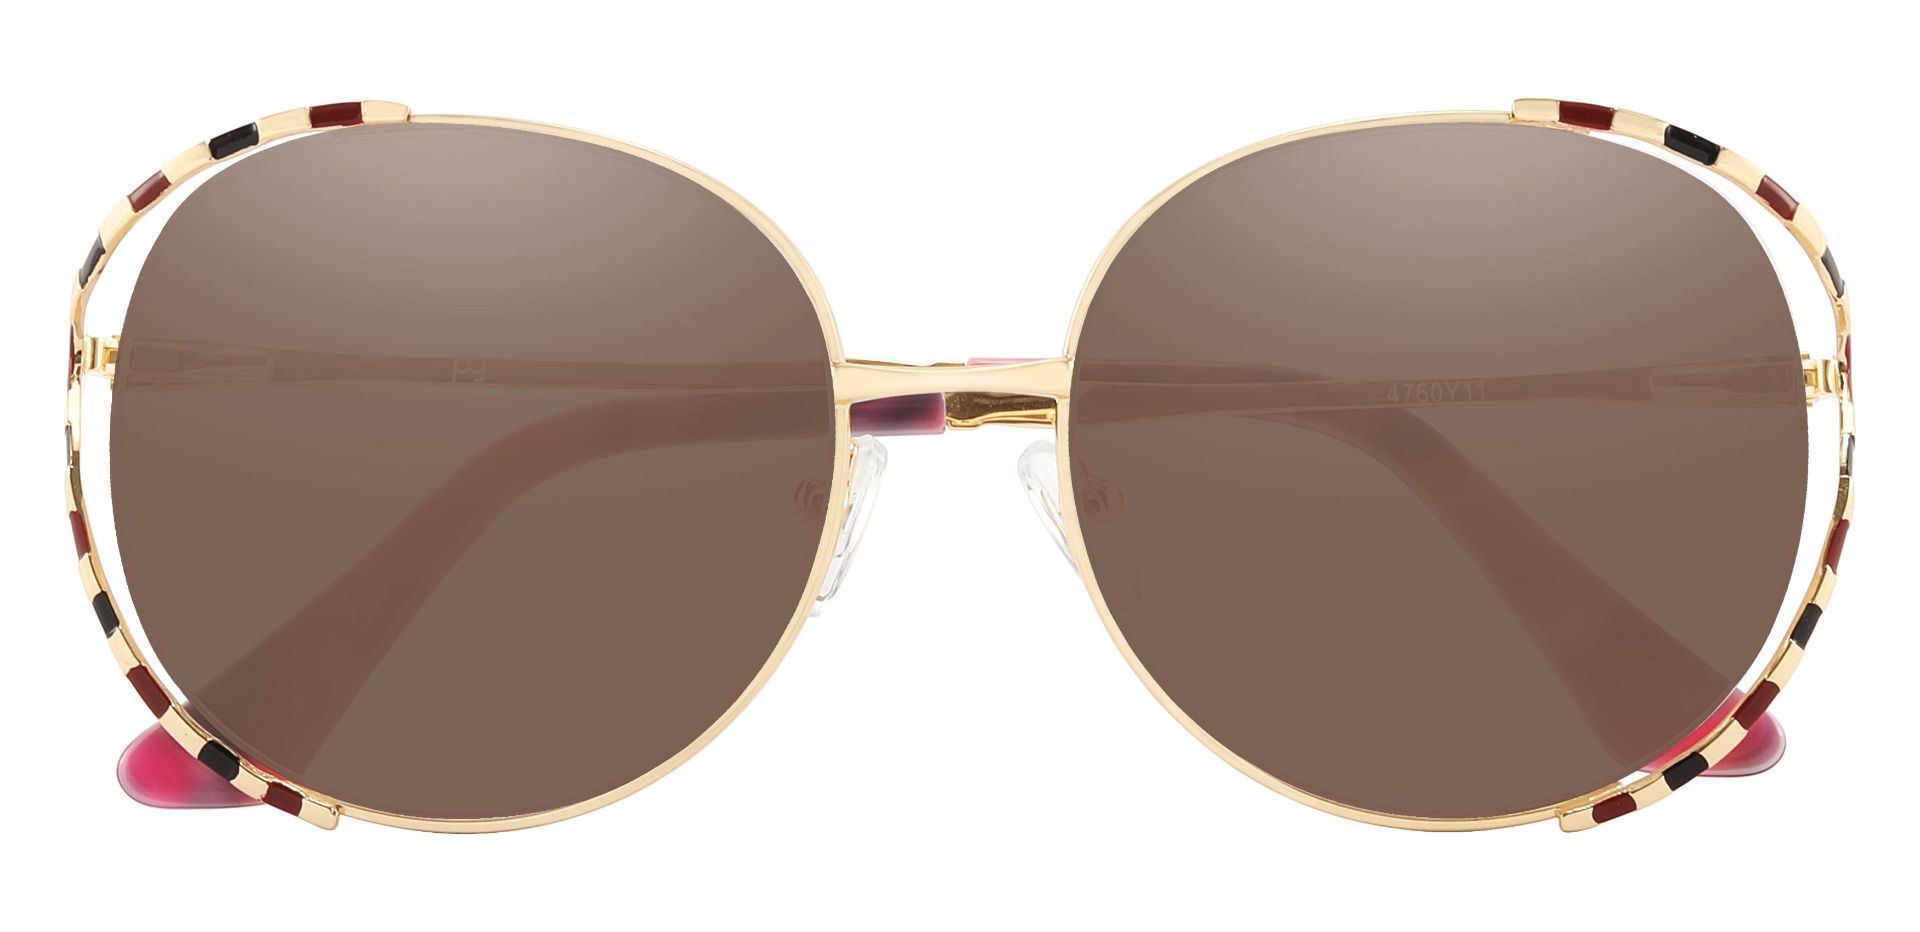 Dorothy Oval Lined Bifocal Sunglasses - Pink Frame With Brown Lenses